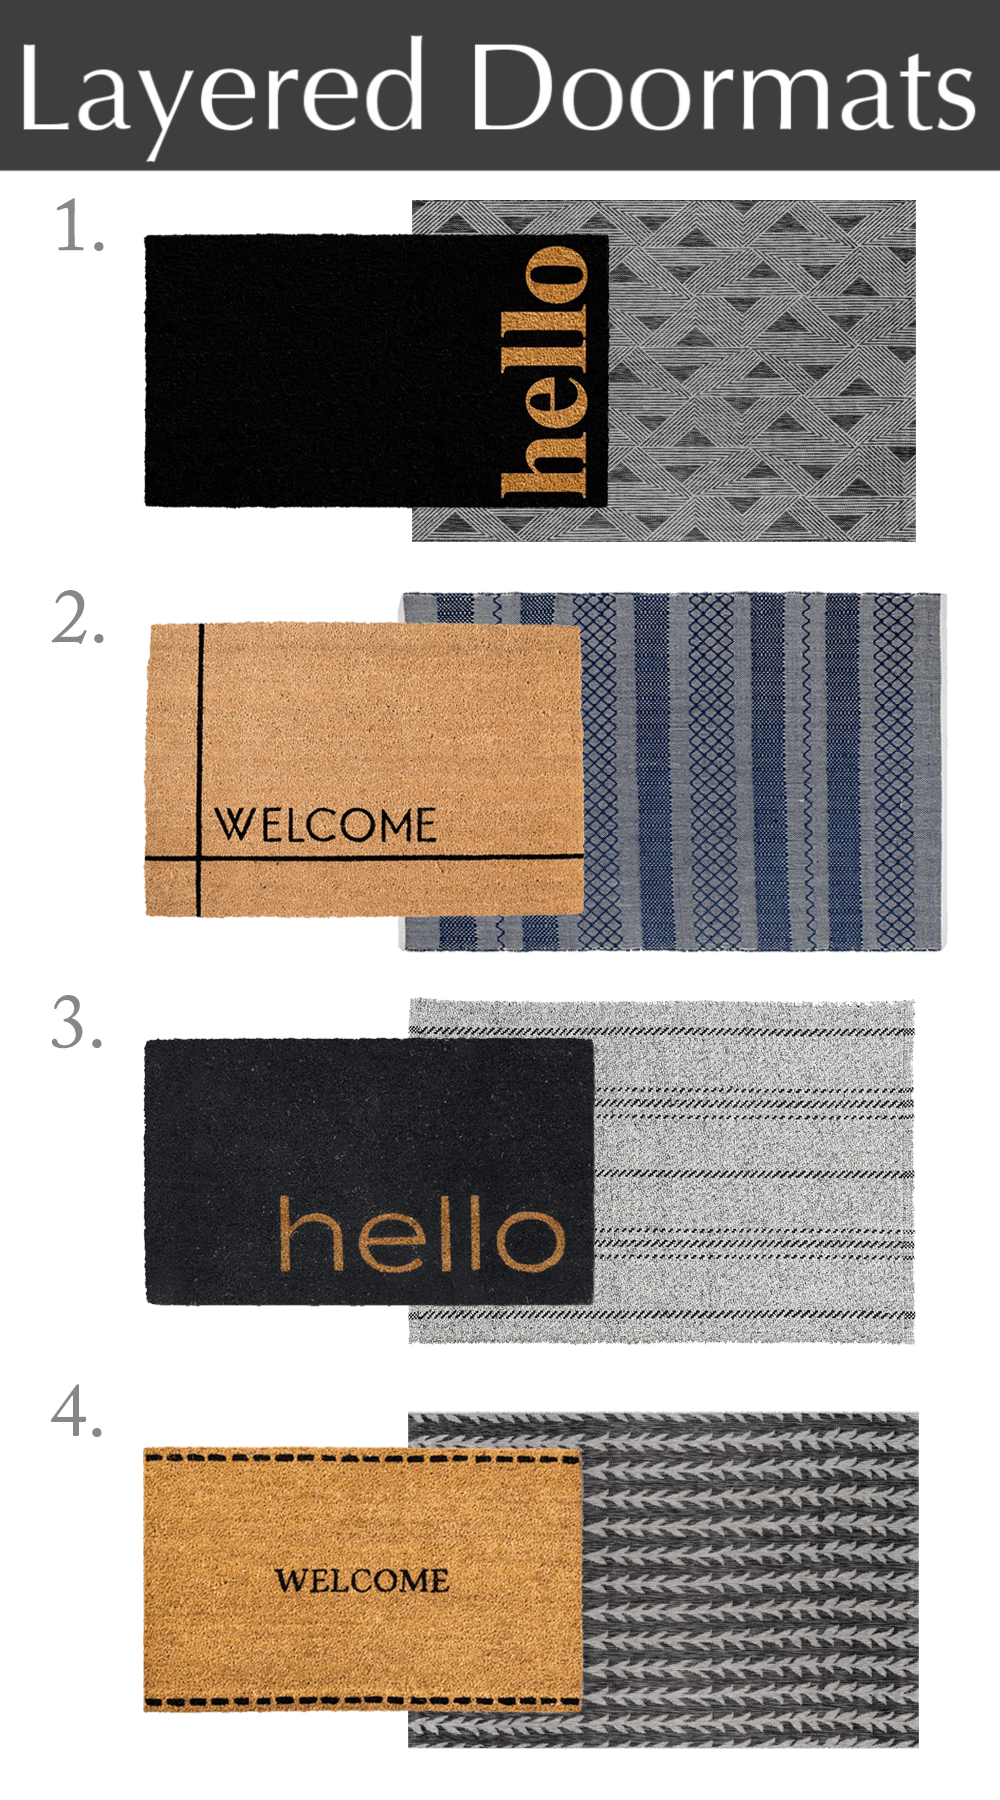 Layered Doormats for Summer - How to Mix and Match - Making Joy and Pretty  Things